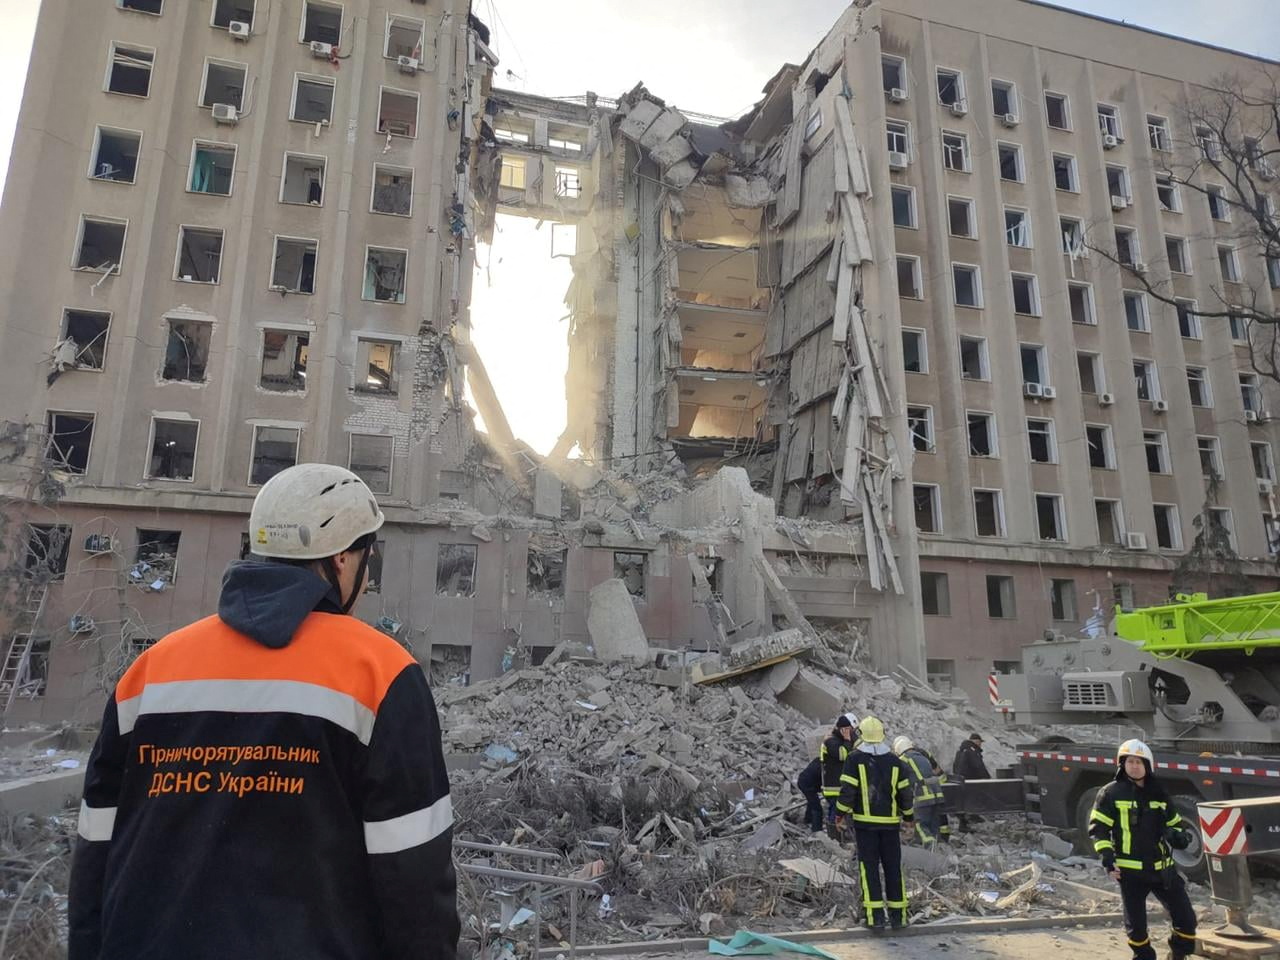 Rescuers work at a site of the regional administration building hit by cruise missiles in Mykolaiv